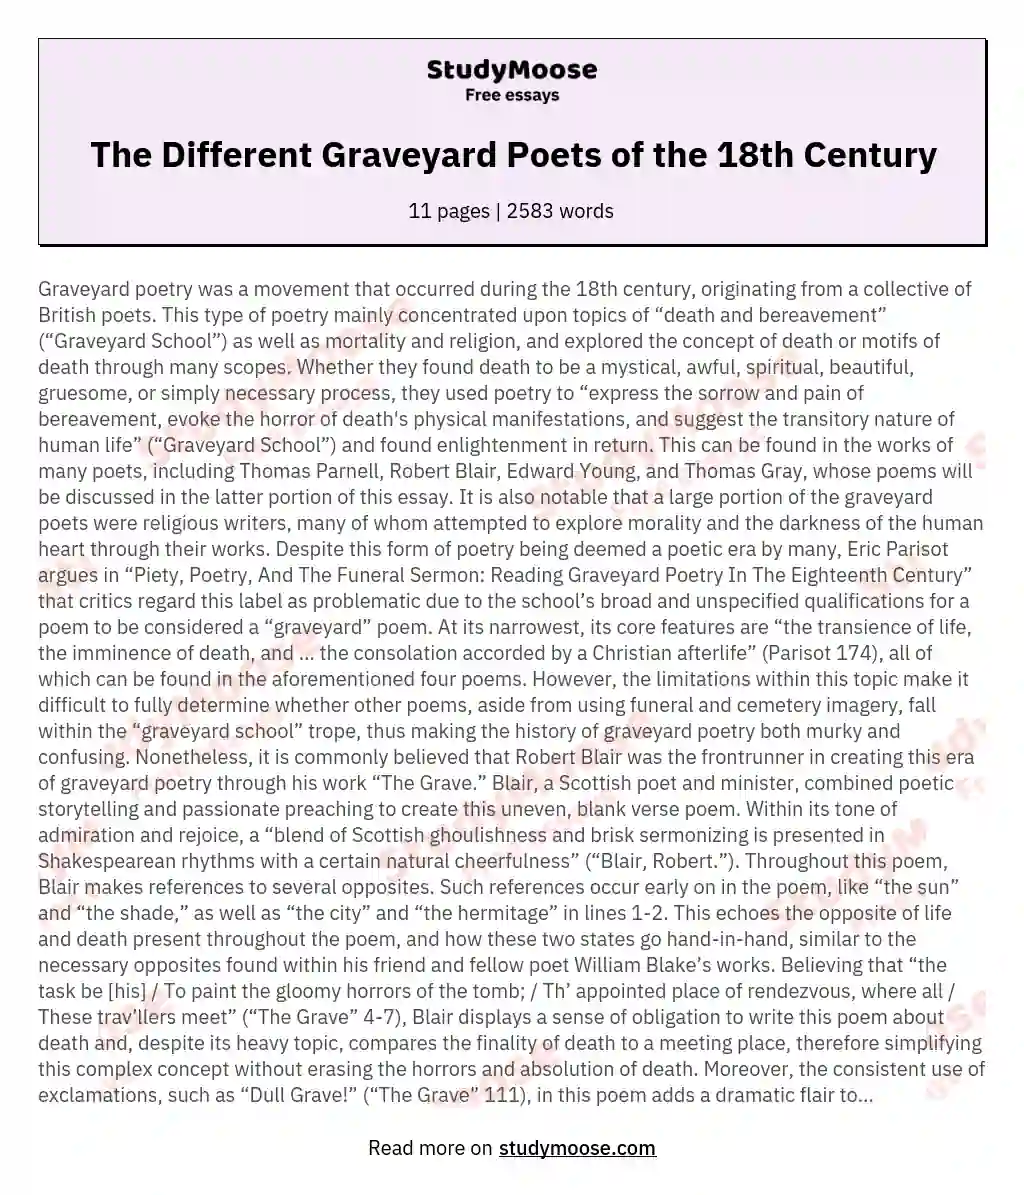 The Different Graveyard Poets of the 18th Century